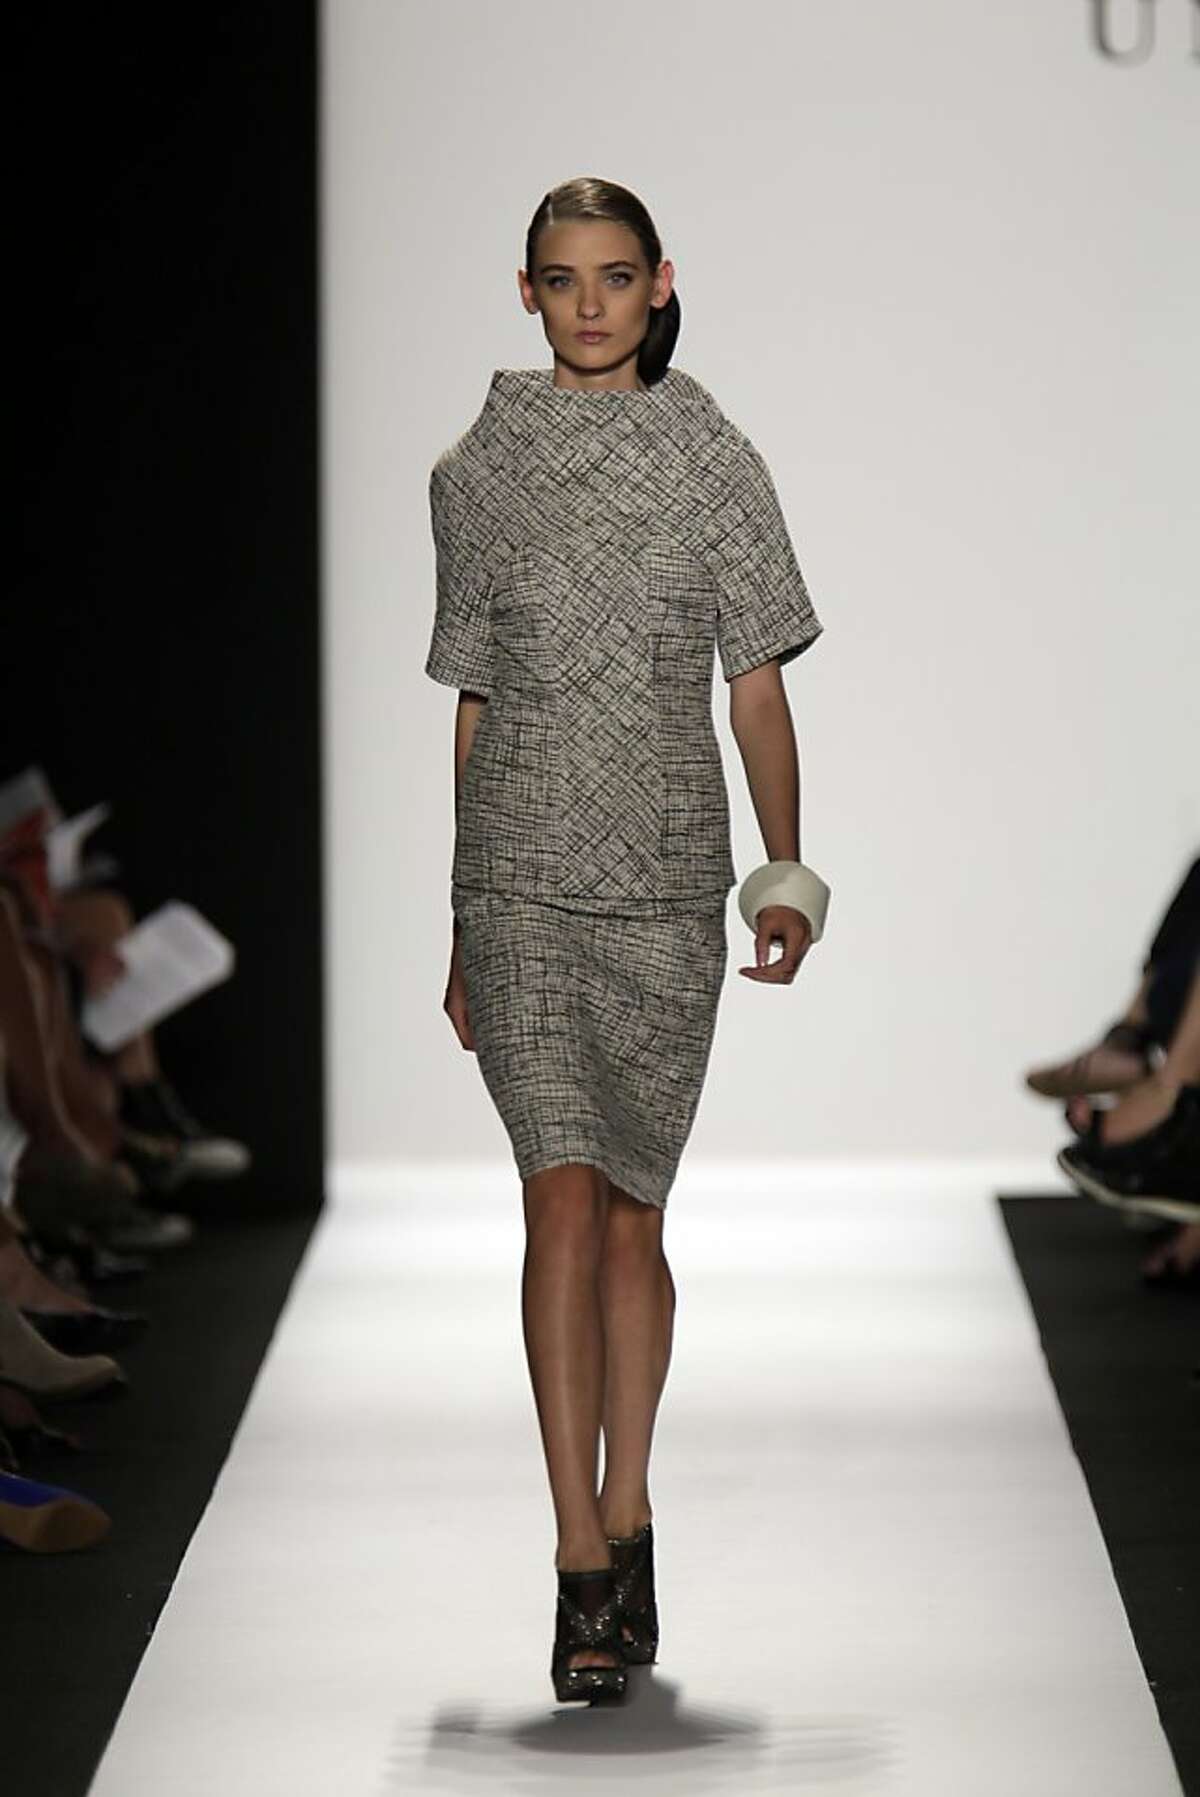 Runway looks by Tanja Milutinovic at the Academy of Art fashion show Sept. 27.